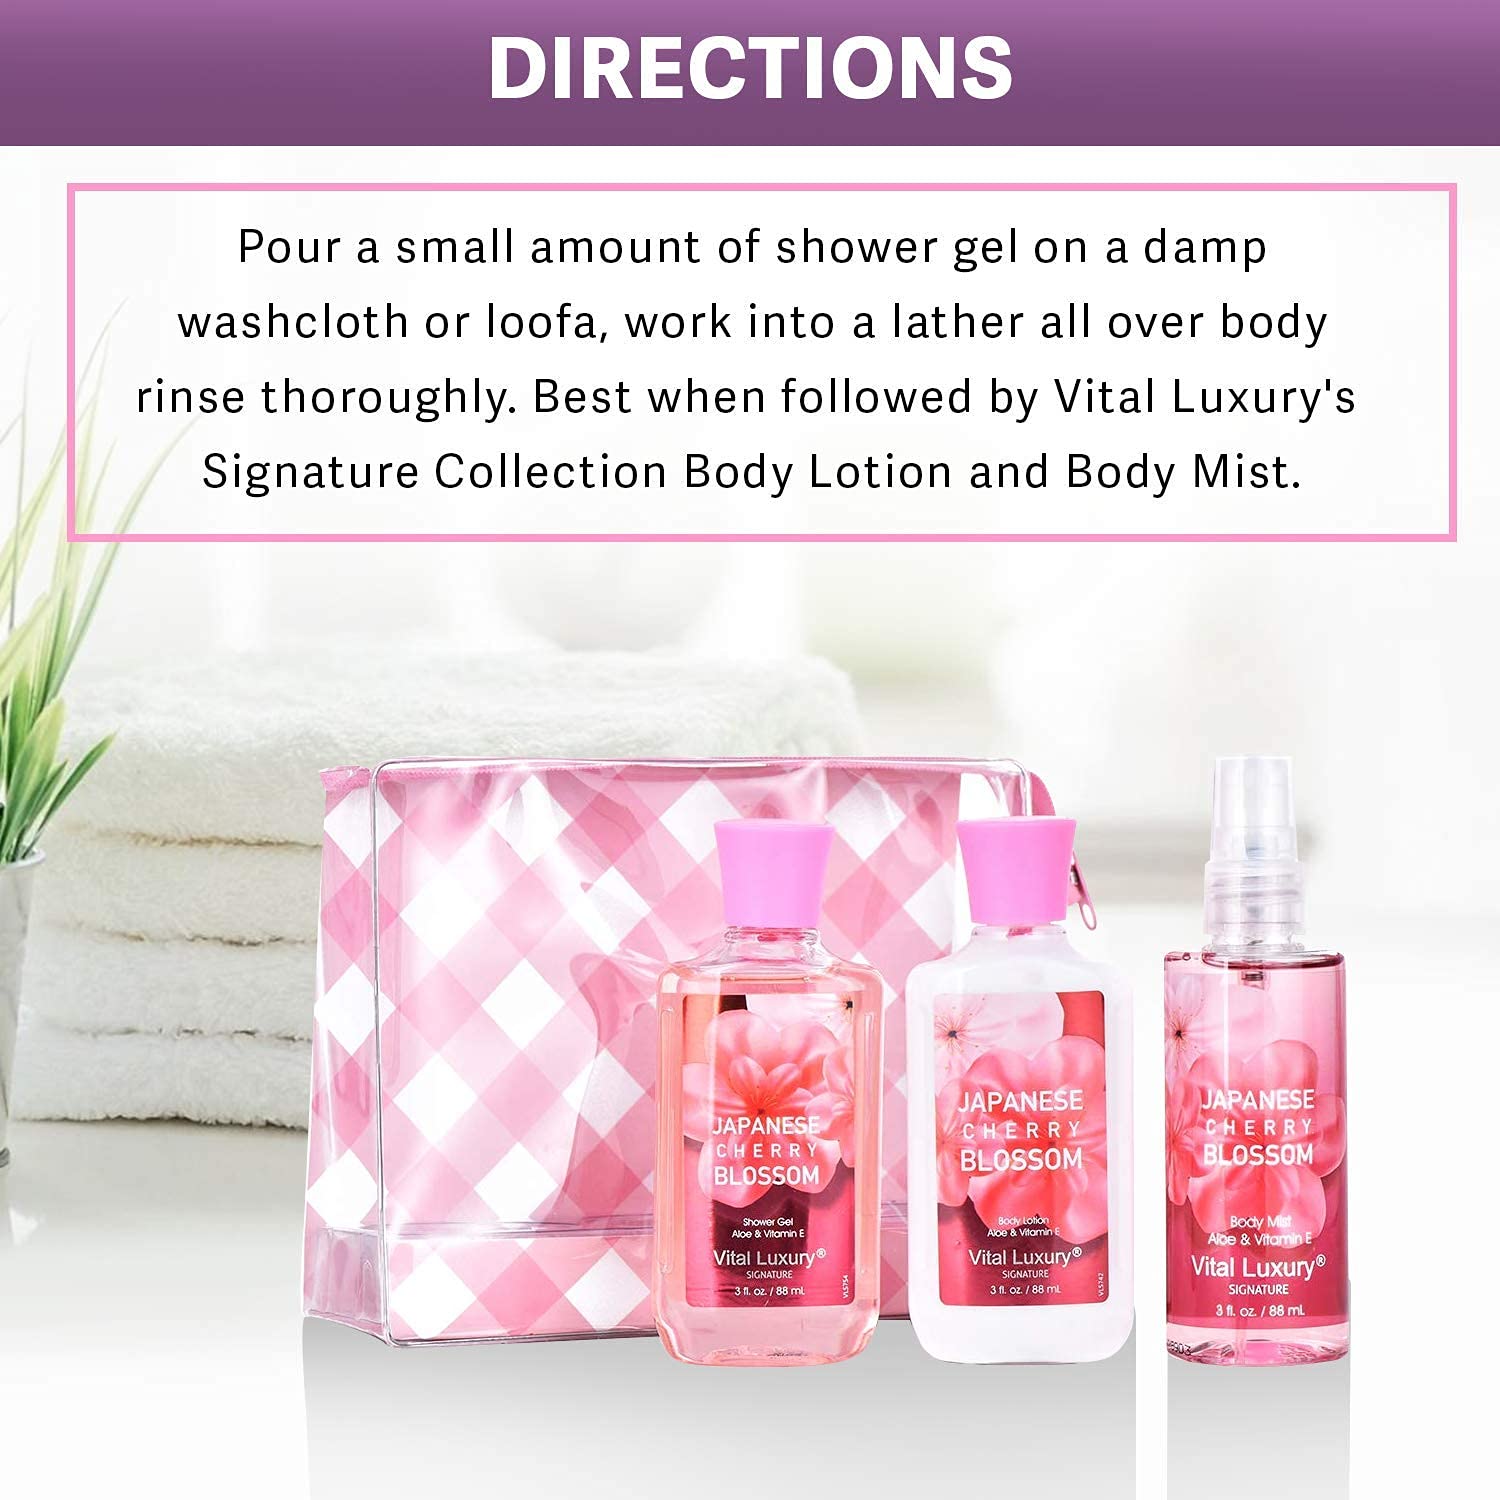 Vital Luxury Bath & Body Kit Japanese Cherry Blossom, 3 Fl Oz, Ideal Skincare Gift, Home Spa Set, Includes Body Lotion, Shower Gel and Fragrance Mist, Perfect for Mother Day Gifts